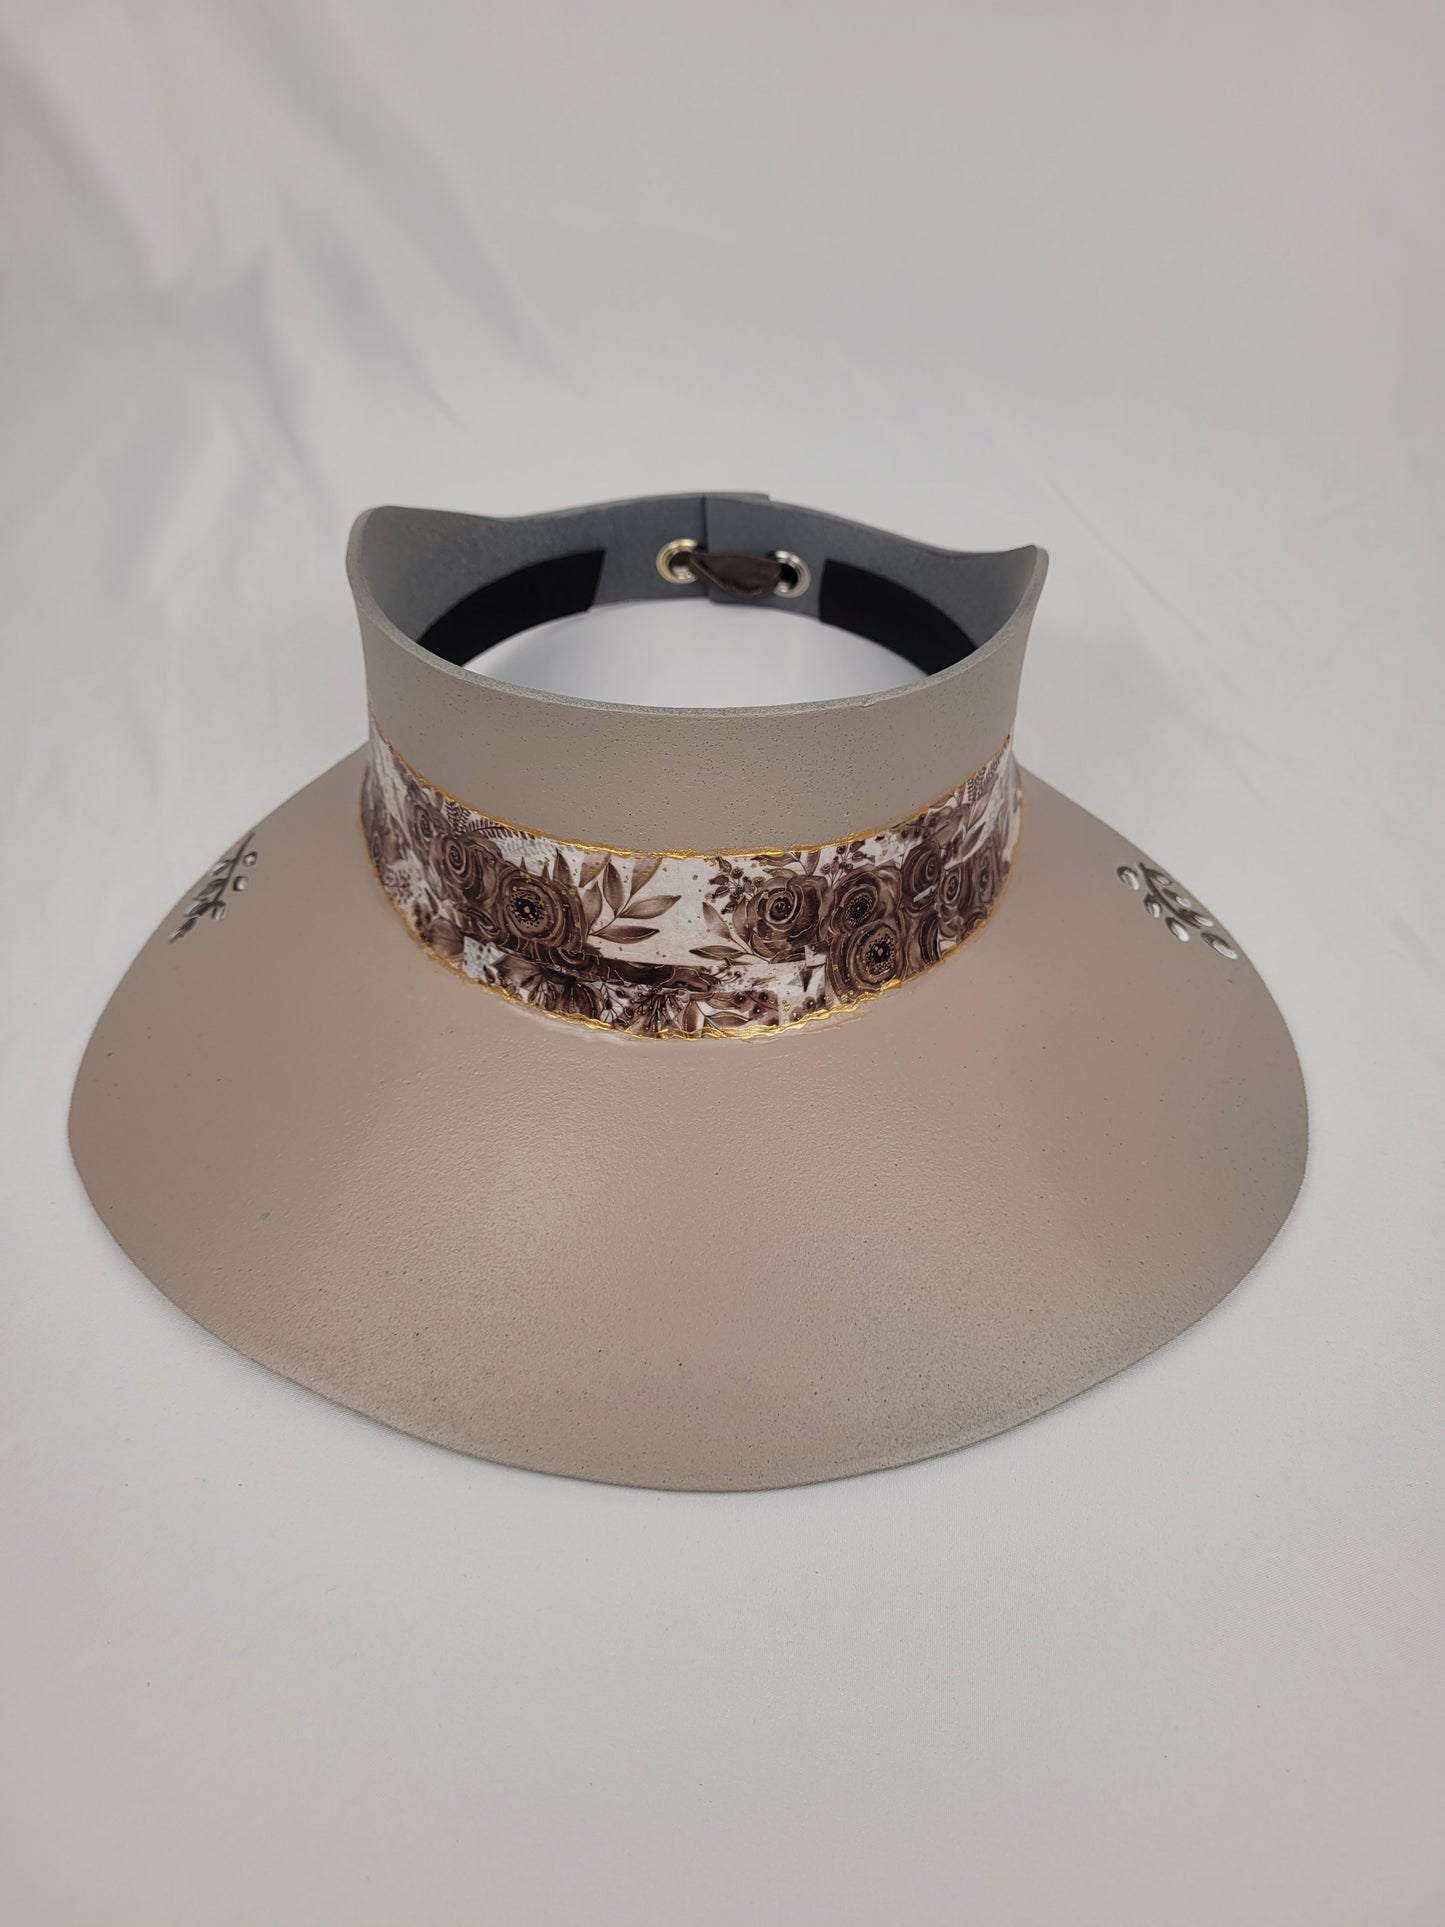 Tall Elegant Taupe Audrey Visor Hat with Neutrals Floral Band and  Handpainted Floral Motifs: Golf, Pool, Hiking